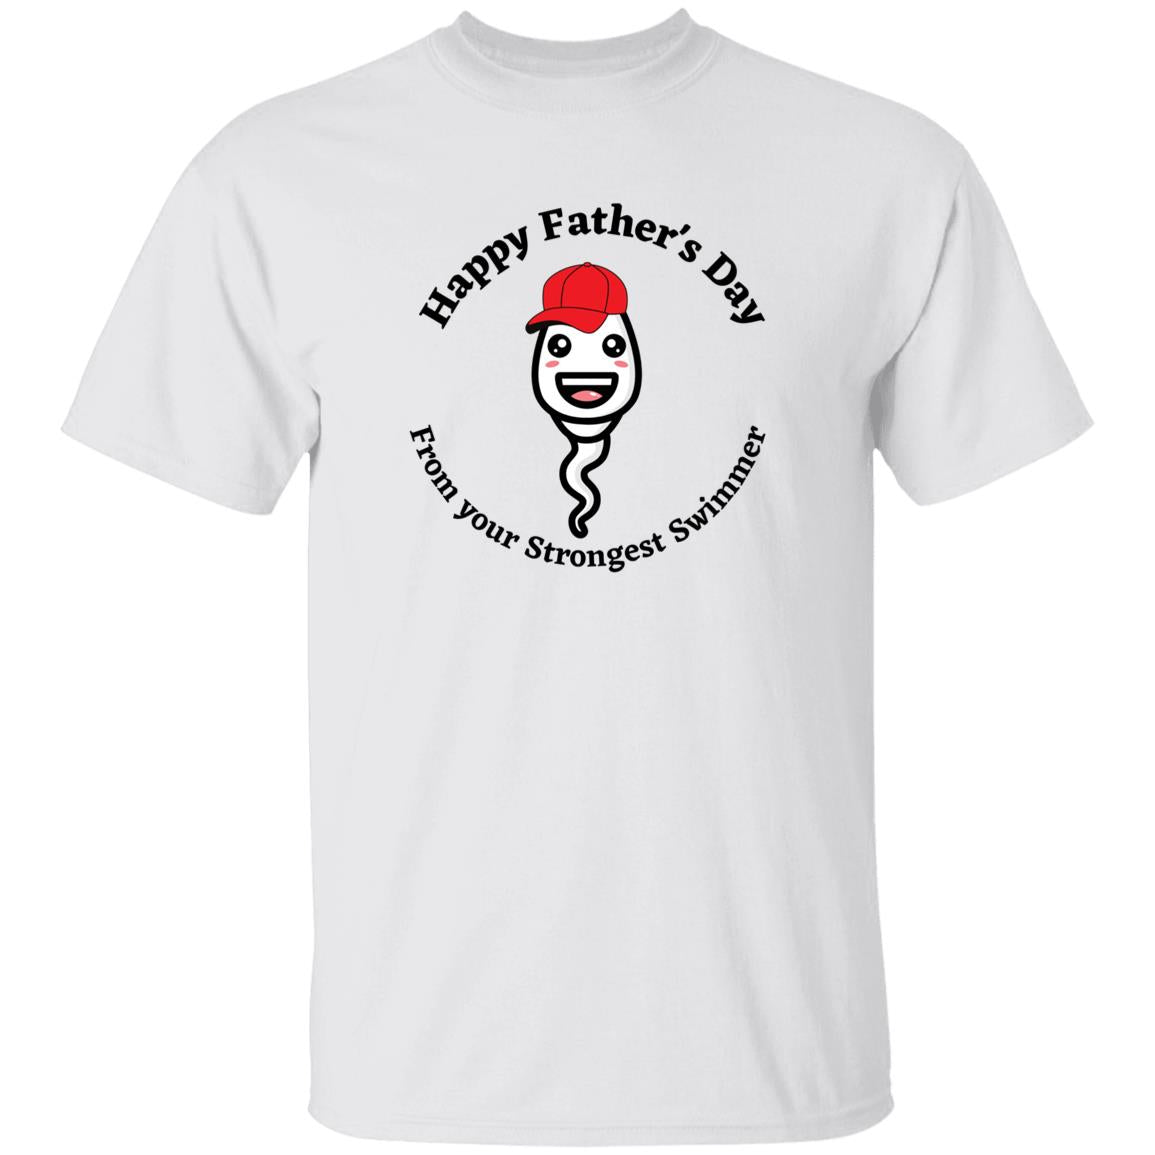 Happy Father's Day  From your Fastest Swimmer (Ball cap Sperm) G500 oz. T-ShirtG500 5.3 oz. T-Shirt